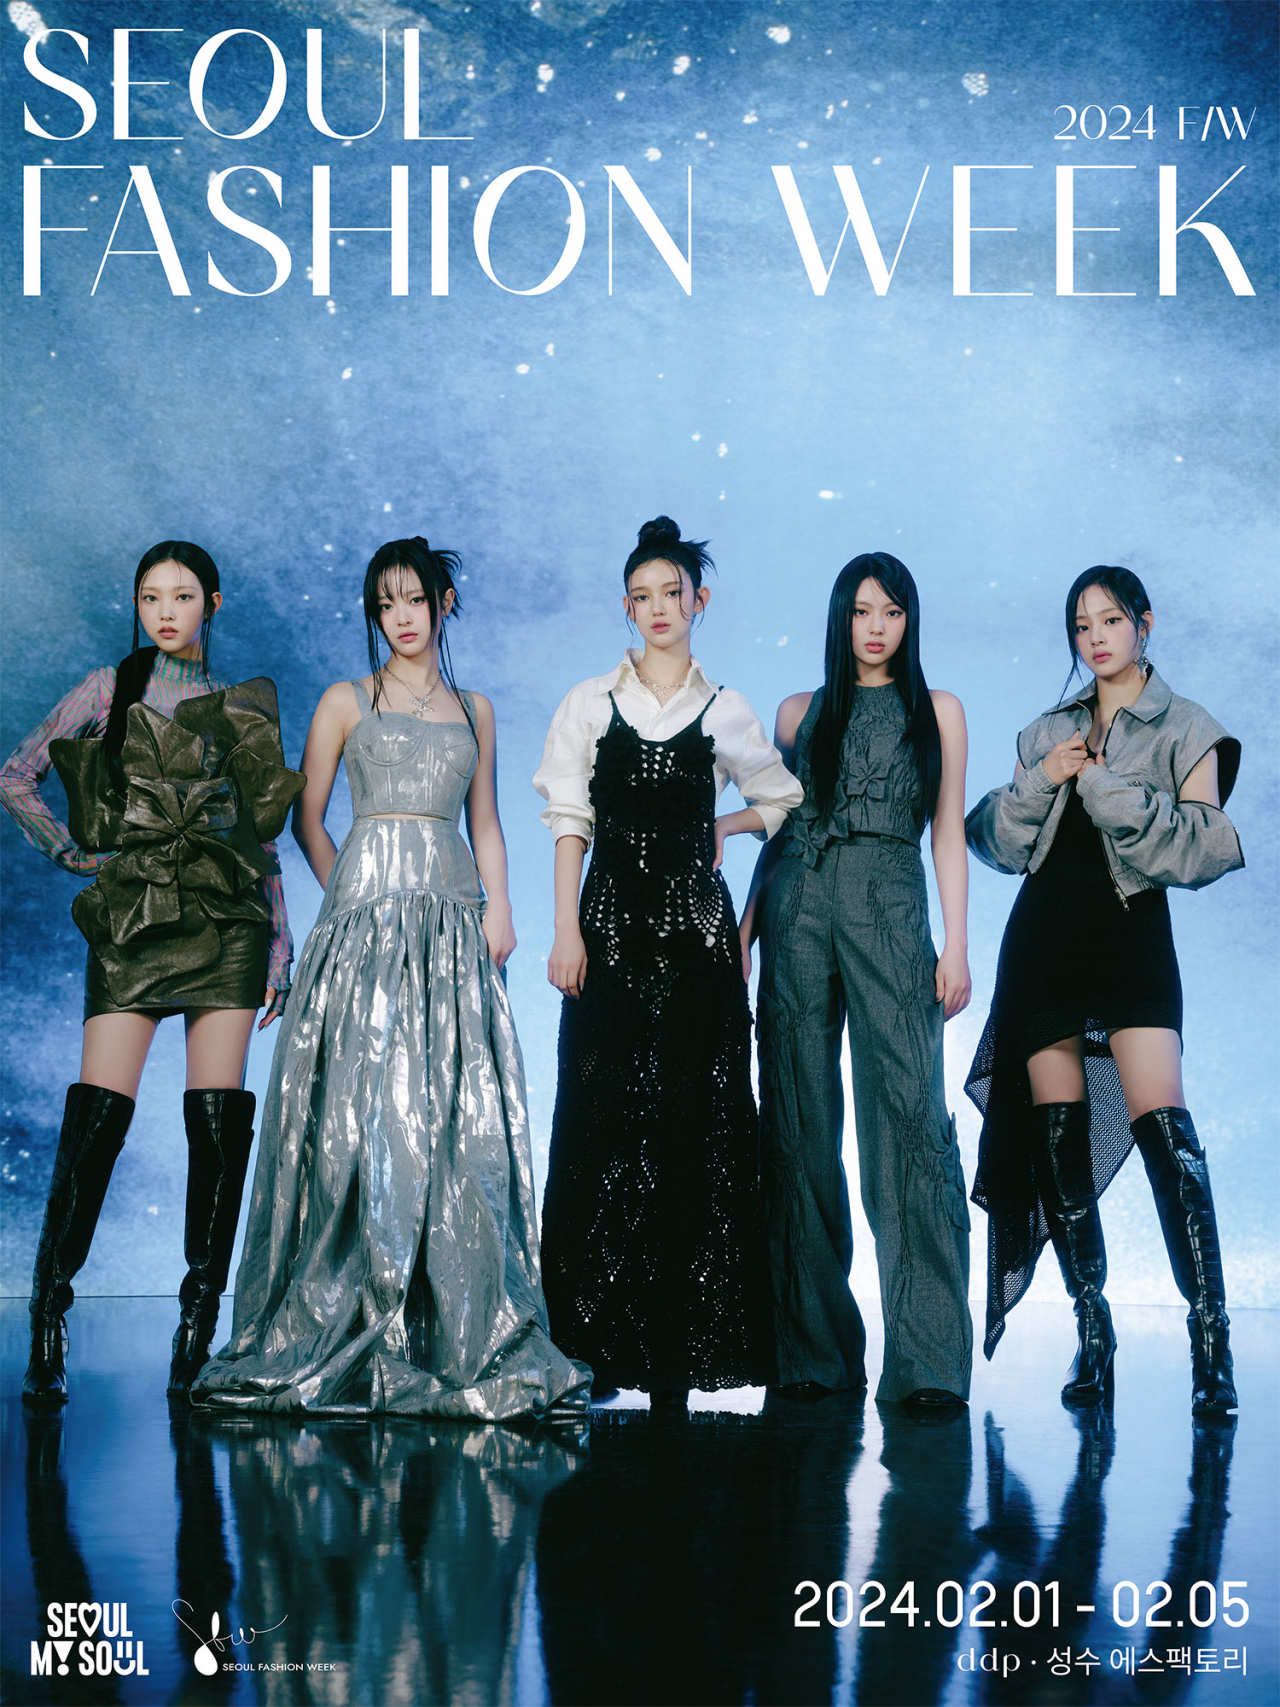 A poster for the 2024 Seoul Fashion Week featuring K-pop group NewJeans. (Seoul City)